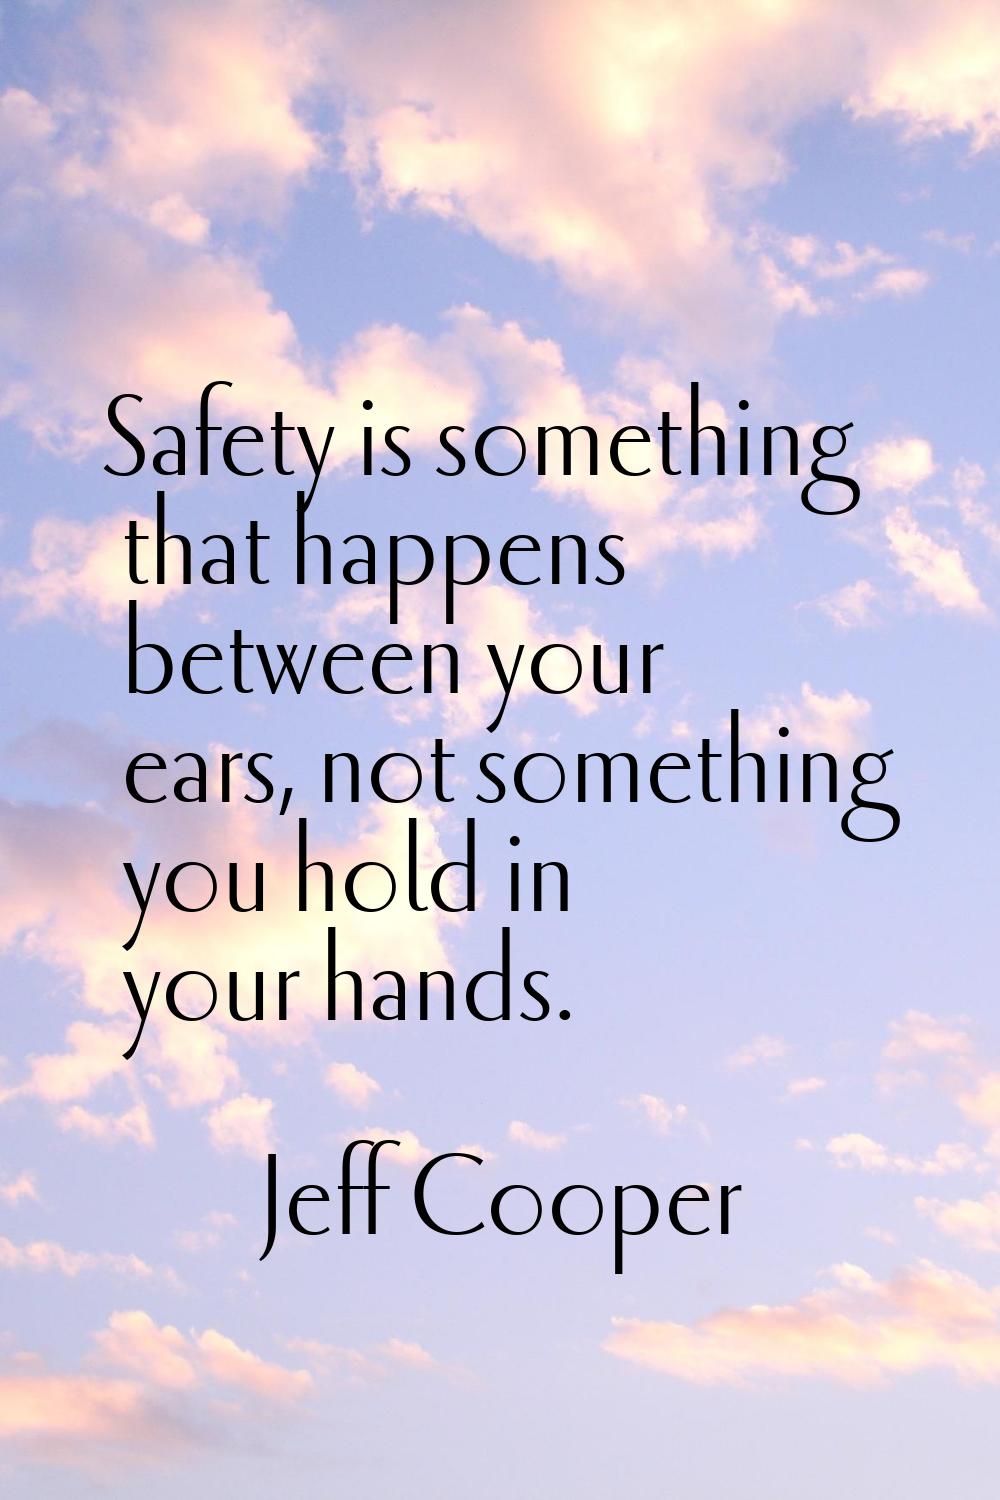 Safety is something that happens between your ears, not something you hold in your hands.